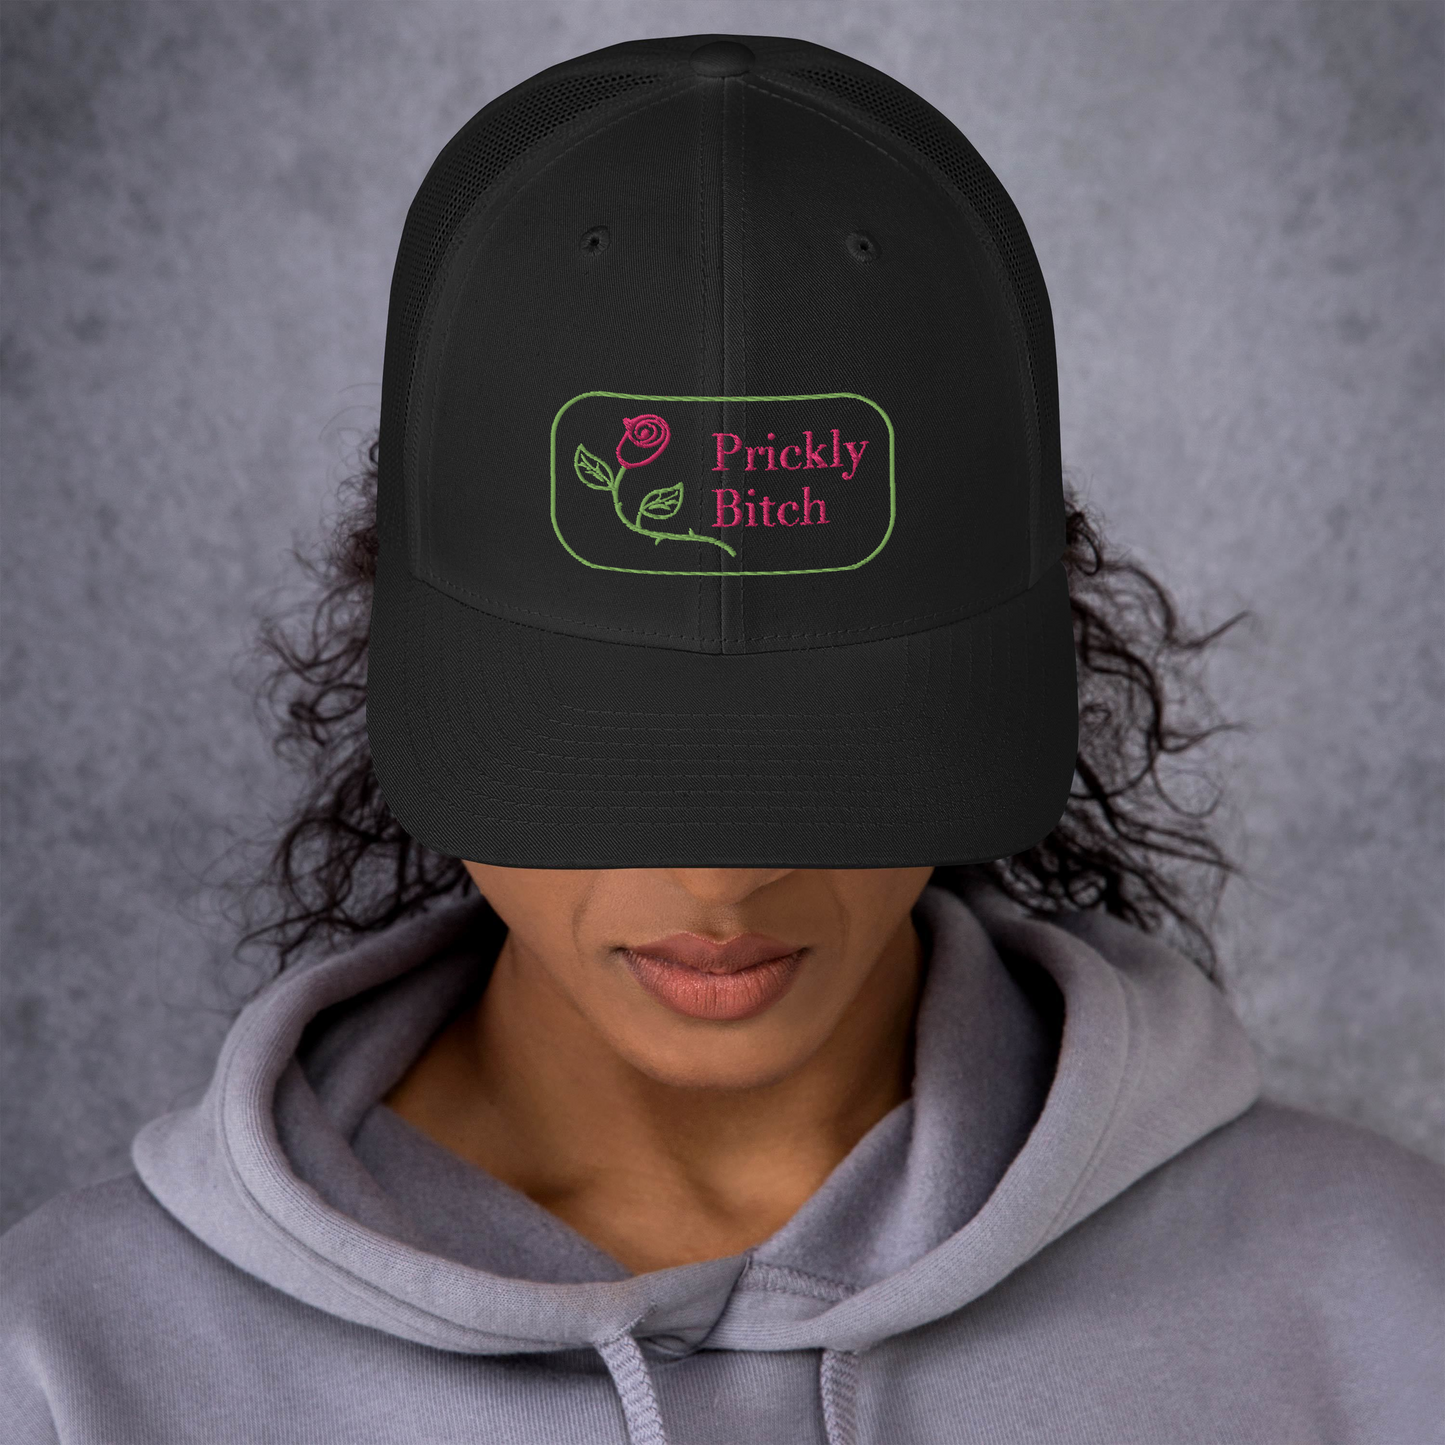 Prickly Bitch Embroidered Trucker Cap | Snap Back Hat